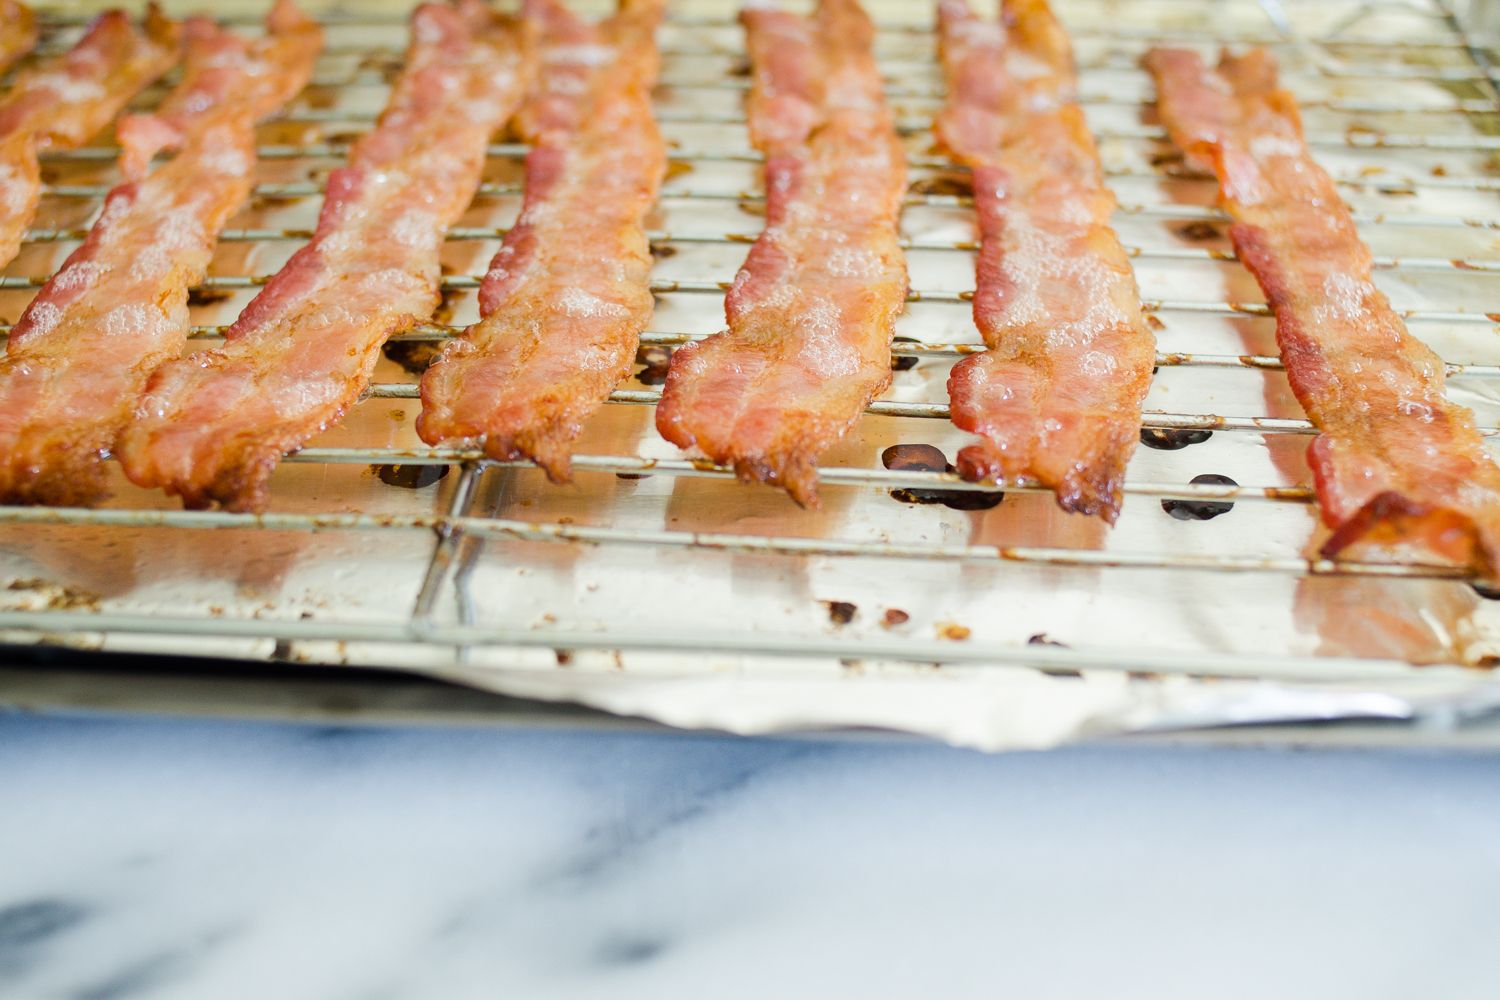 https://hips.hearstapps.com/thepioneerwoman/wp-content/uploads/2015/09/how-to-cook-bacon-in-the-oven-02.jpg